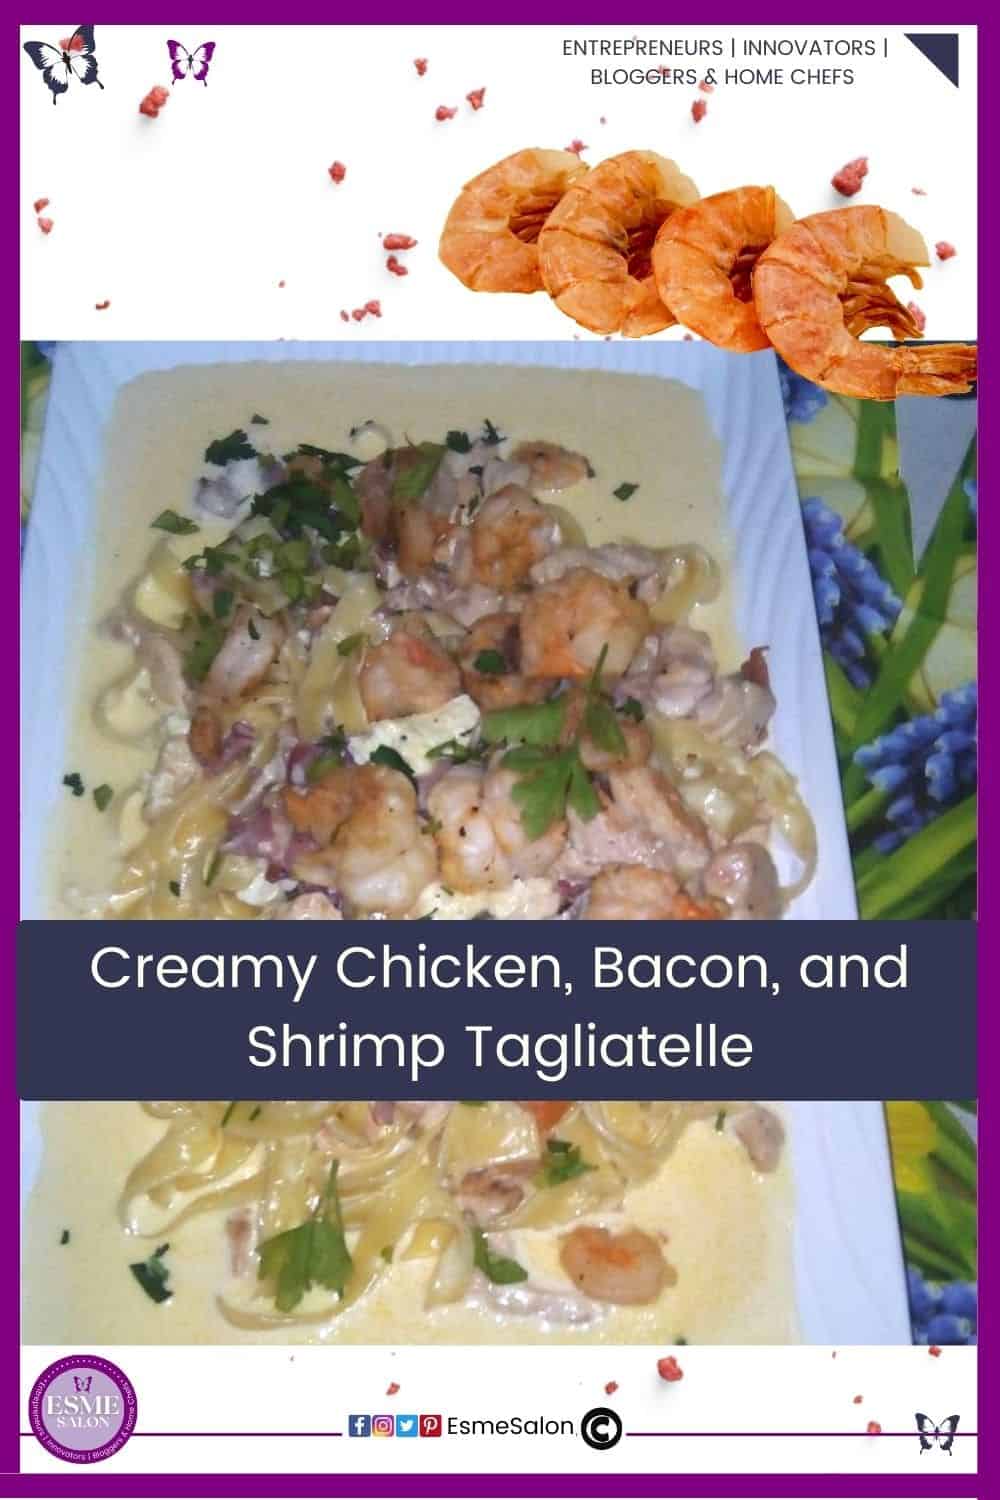 an image of a white oblong platter filled with Creamy Chicken Bacon and Shrimp Tagliatelle